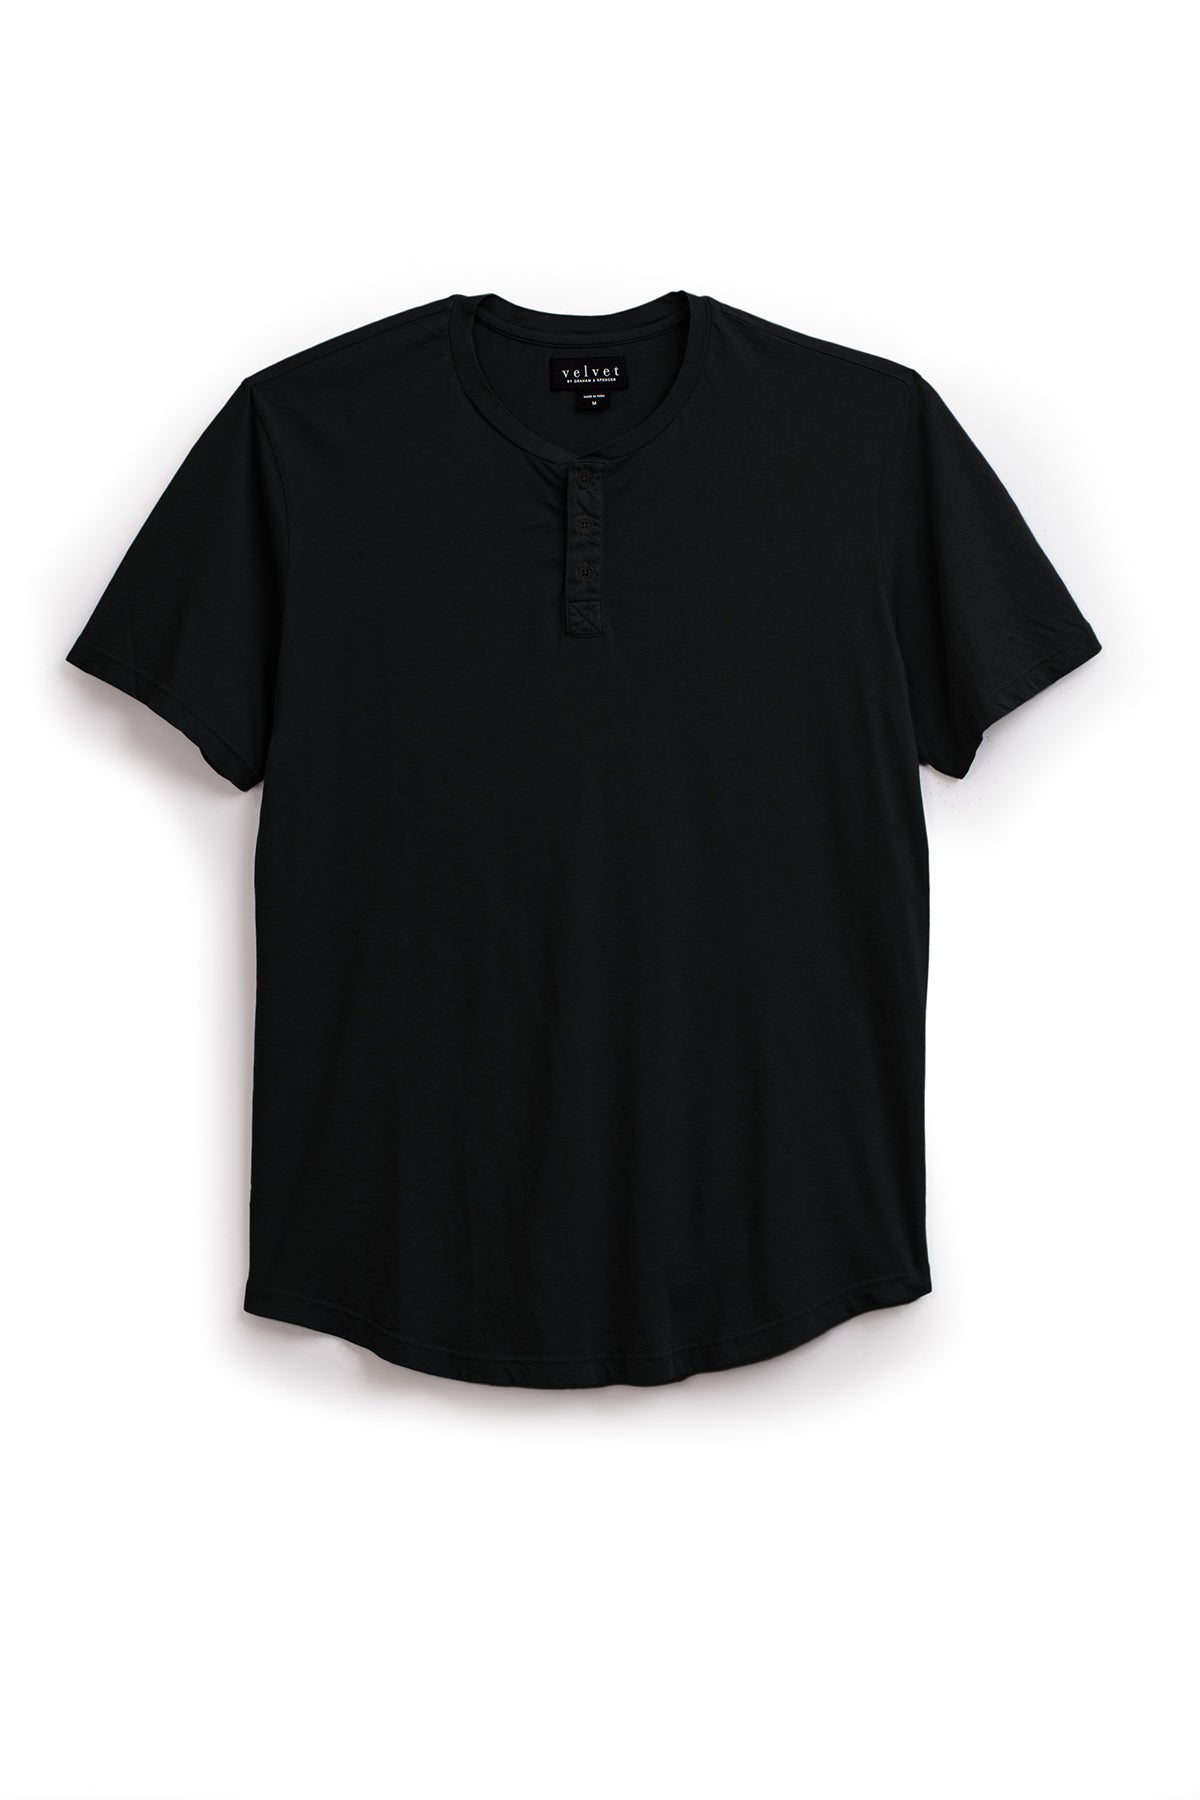 A plain black short-sleeved Fulton henley tee by Velvet by Graham & Spencer with a three-button placket and a curved hemline on a white background.-24559724069057